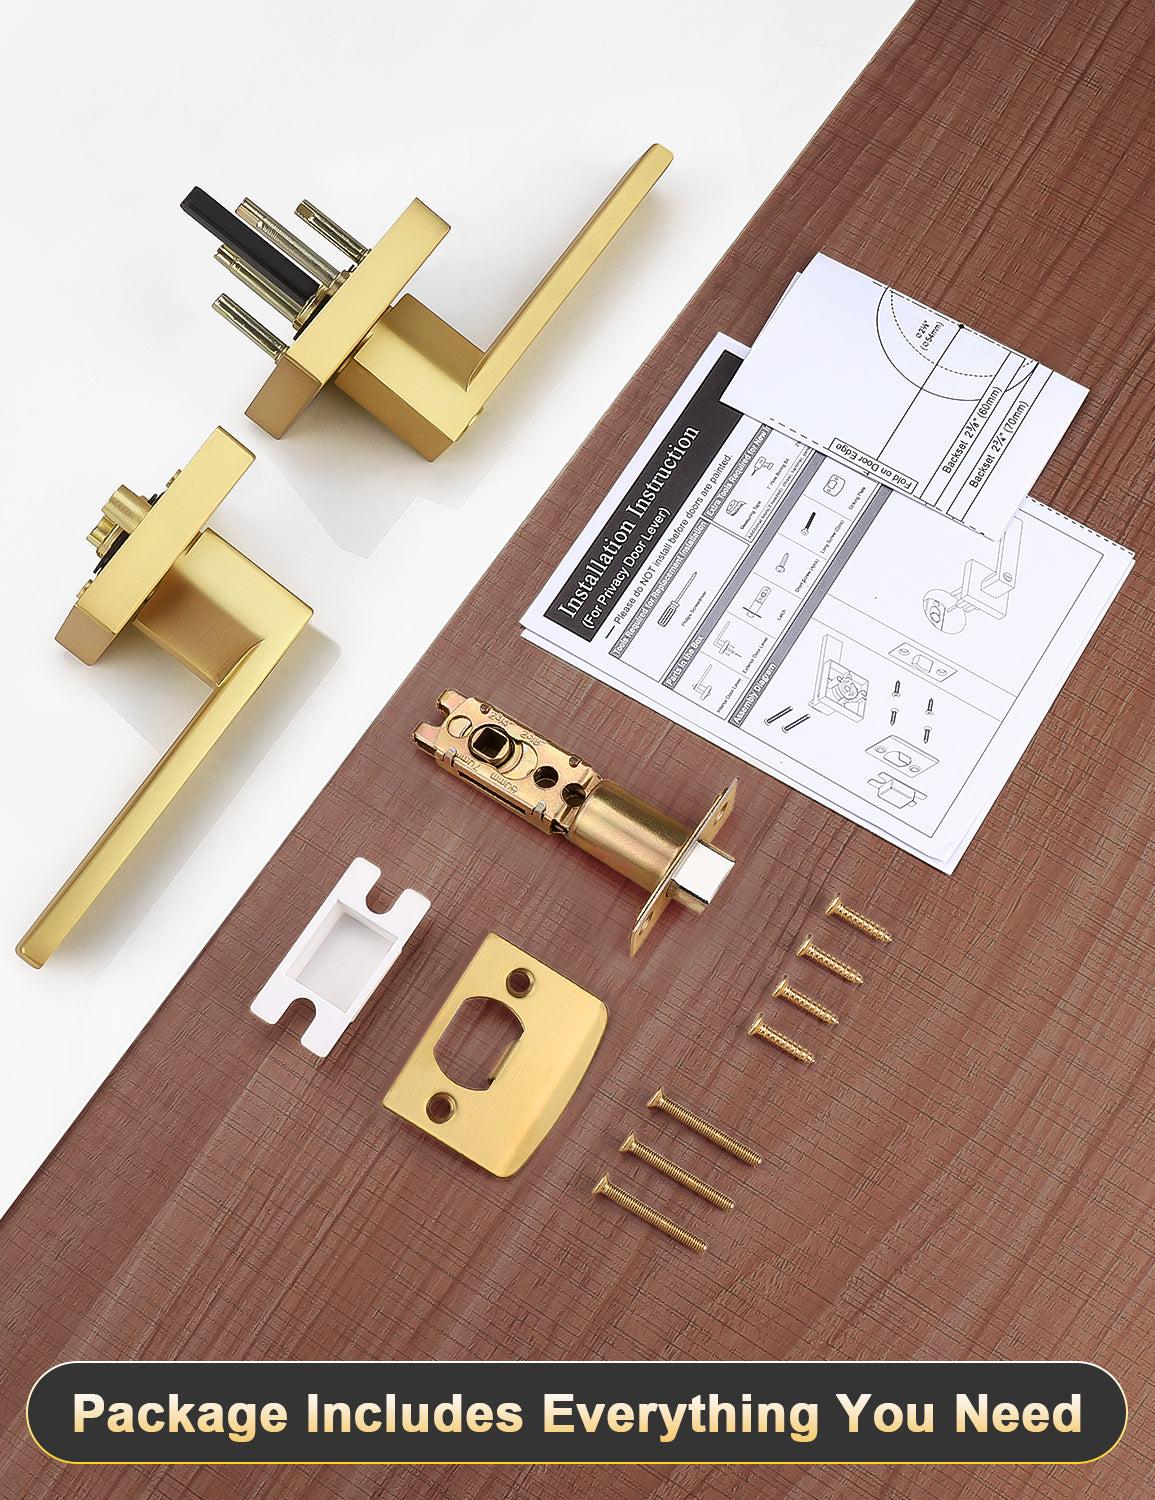 Tinewa 10 Pack Gold Keyless Square Levers Handles, Interior Passage Door Locksets for Hall Closet Door Knobs Lock Reversible Right & Left Handed